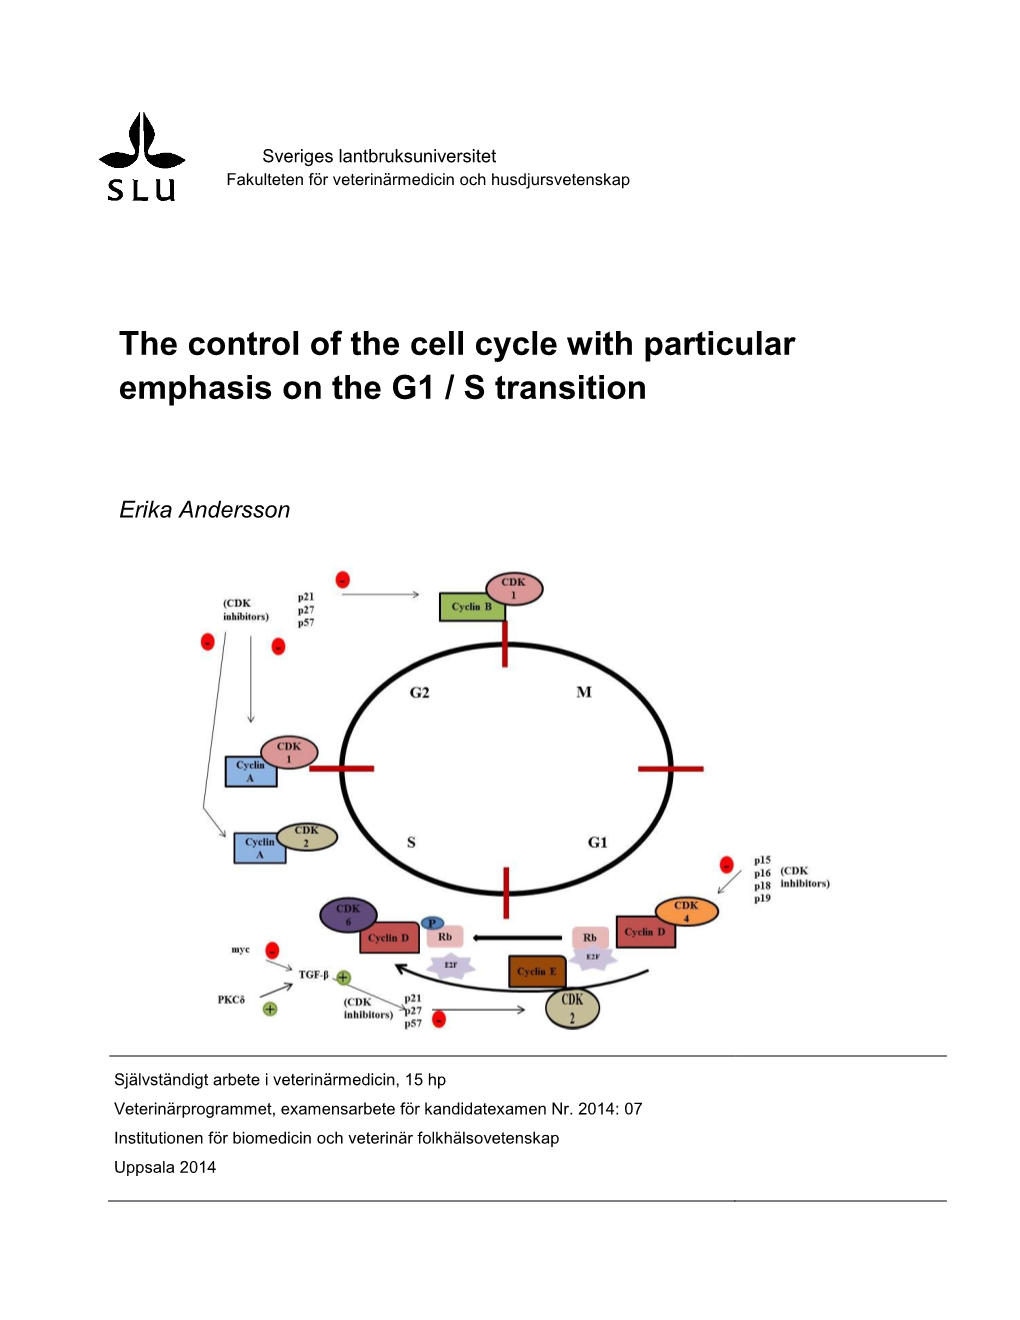 The Control of the Cell Cycle with Particular Emphasis on the G1 / S Transition